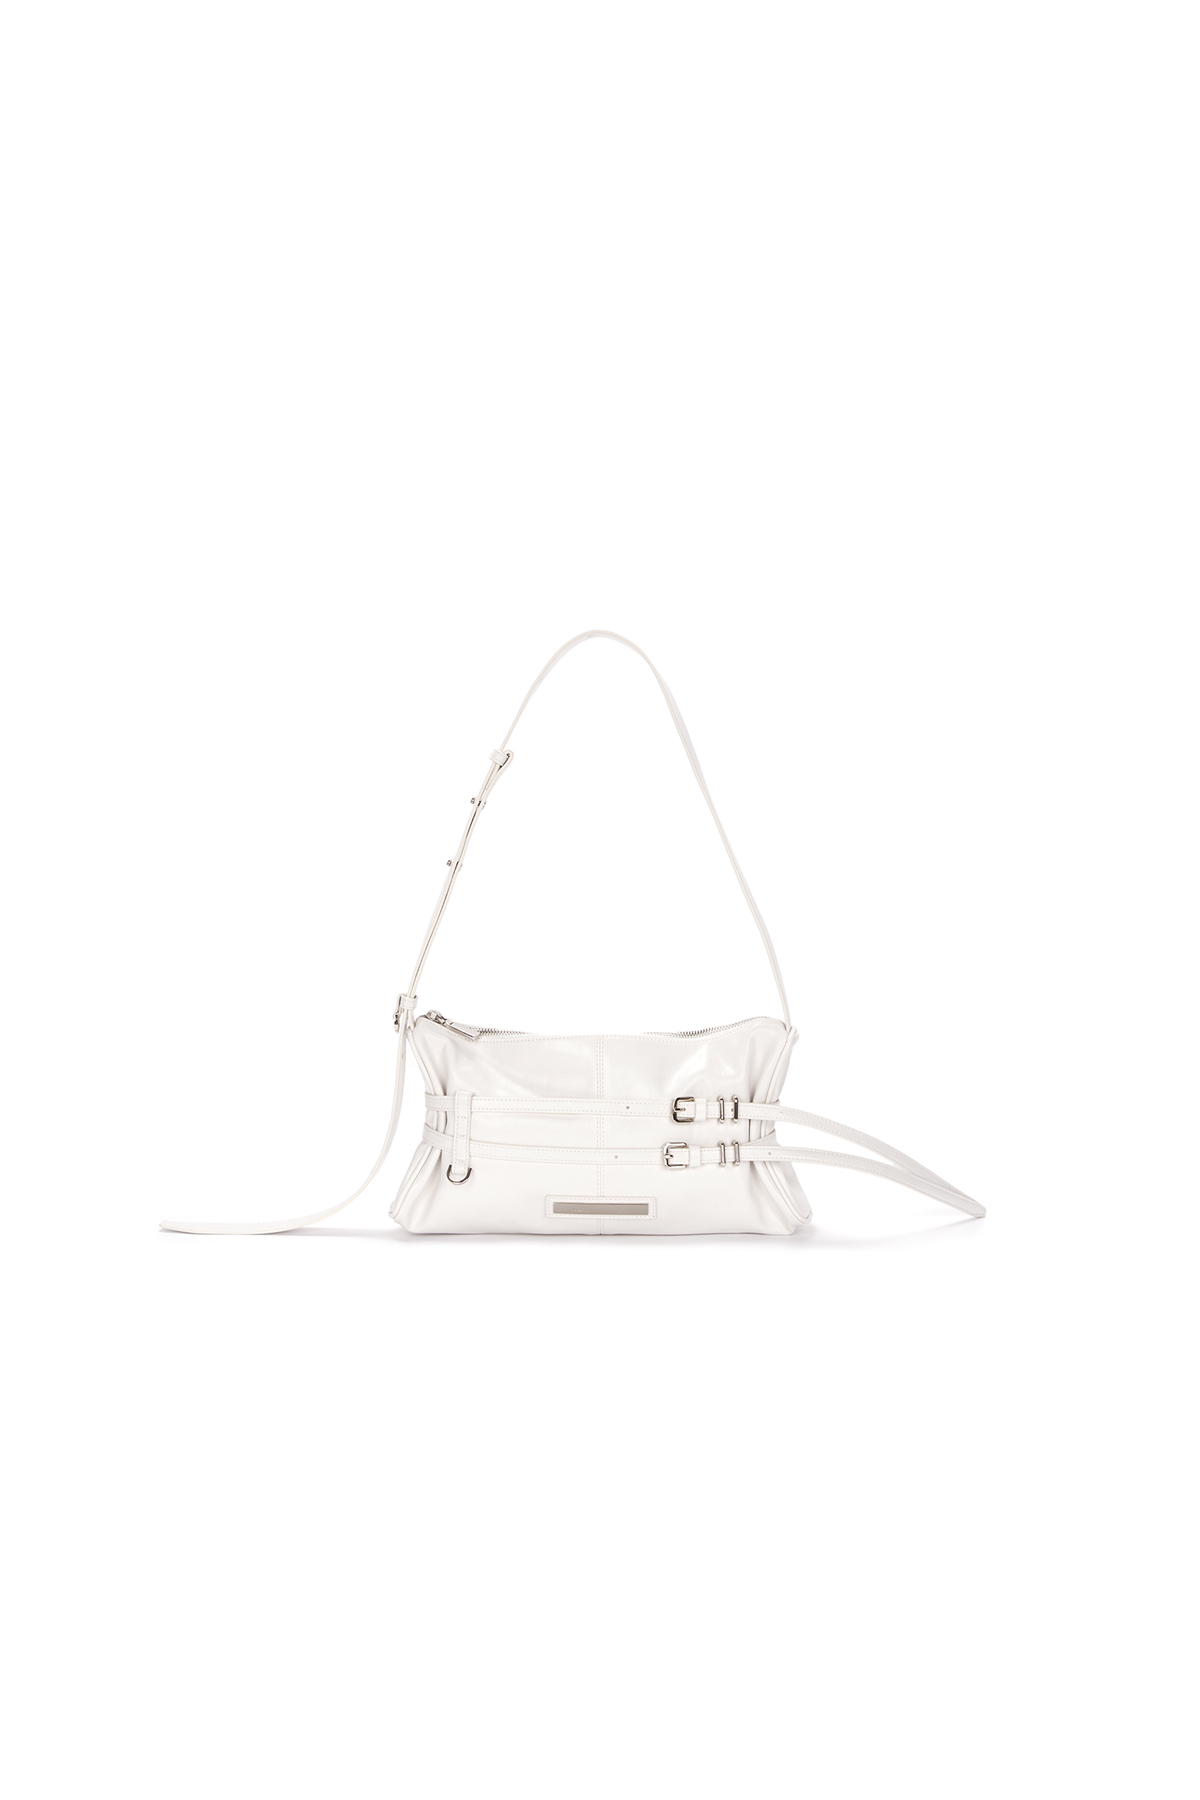 DOUBLE BELTED STRAP MINI BAG IN IVORY